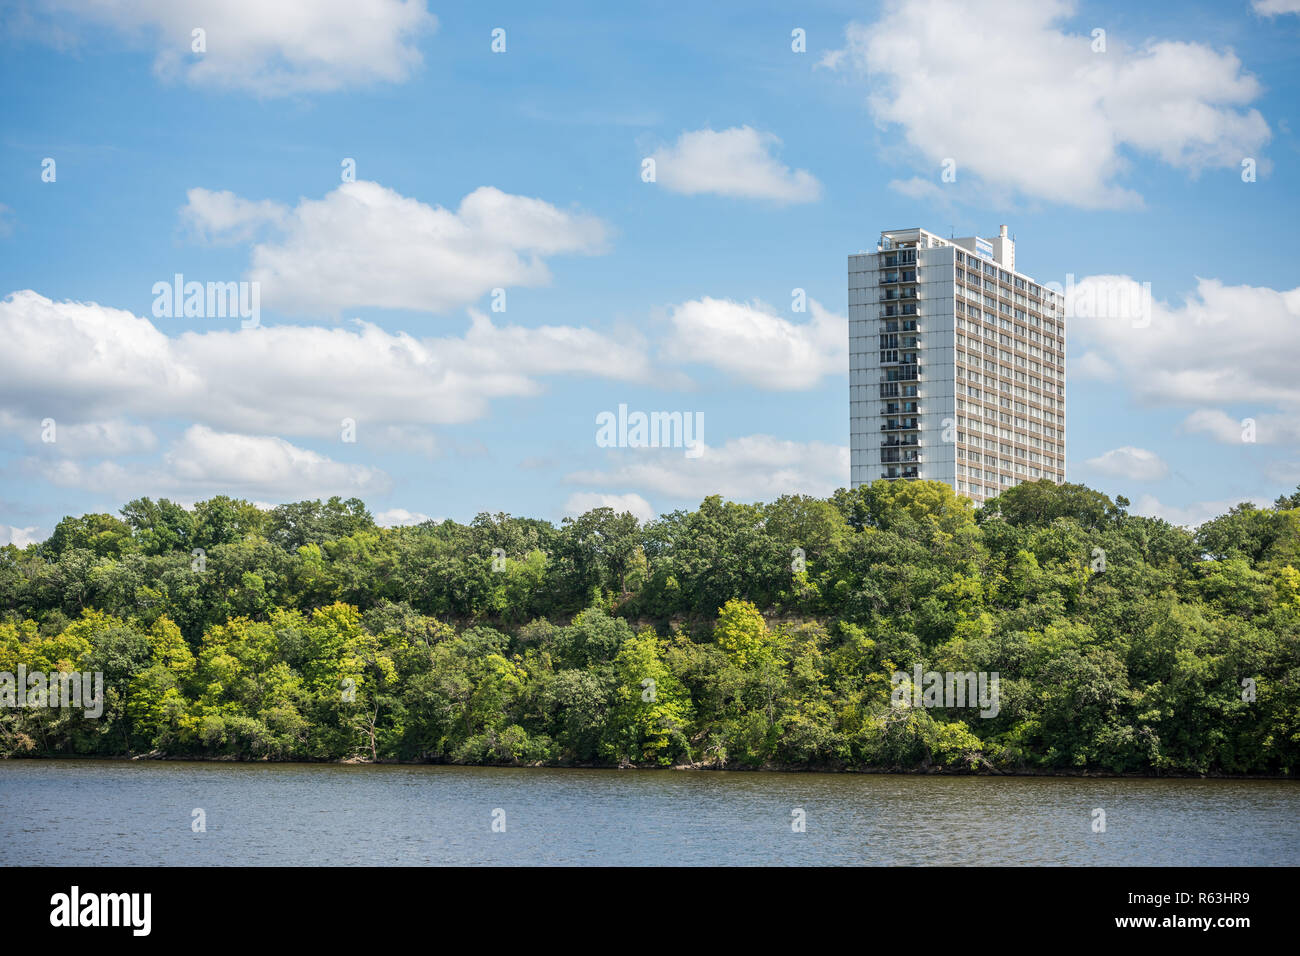 Highrise residential building overlooking the Mississippi River in Minneapolis Stock Photo